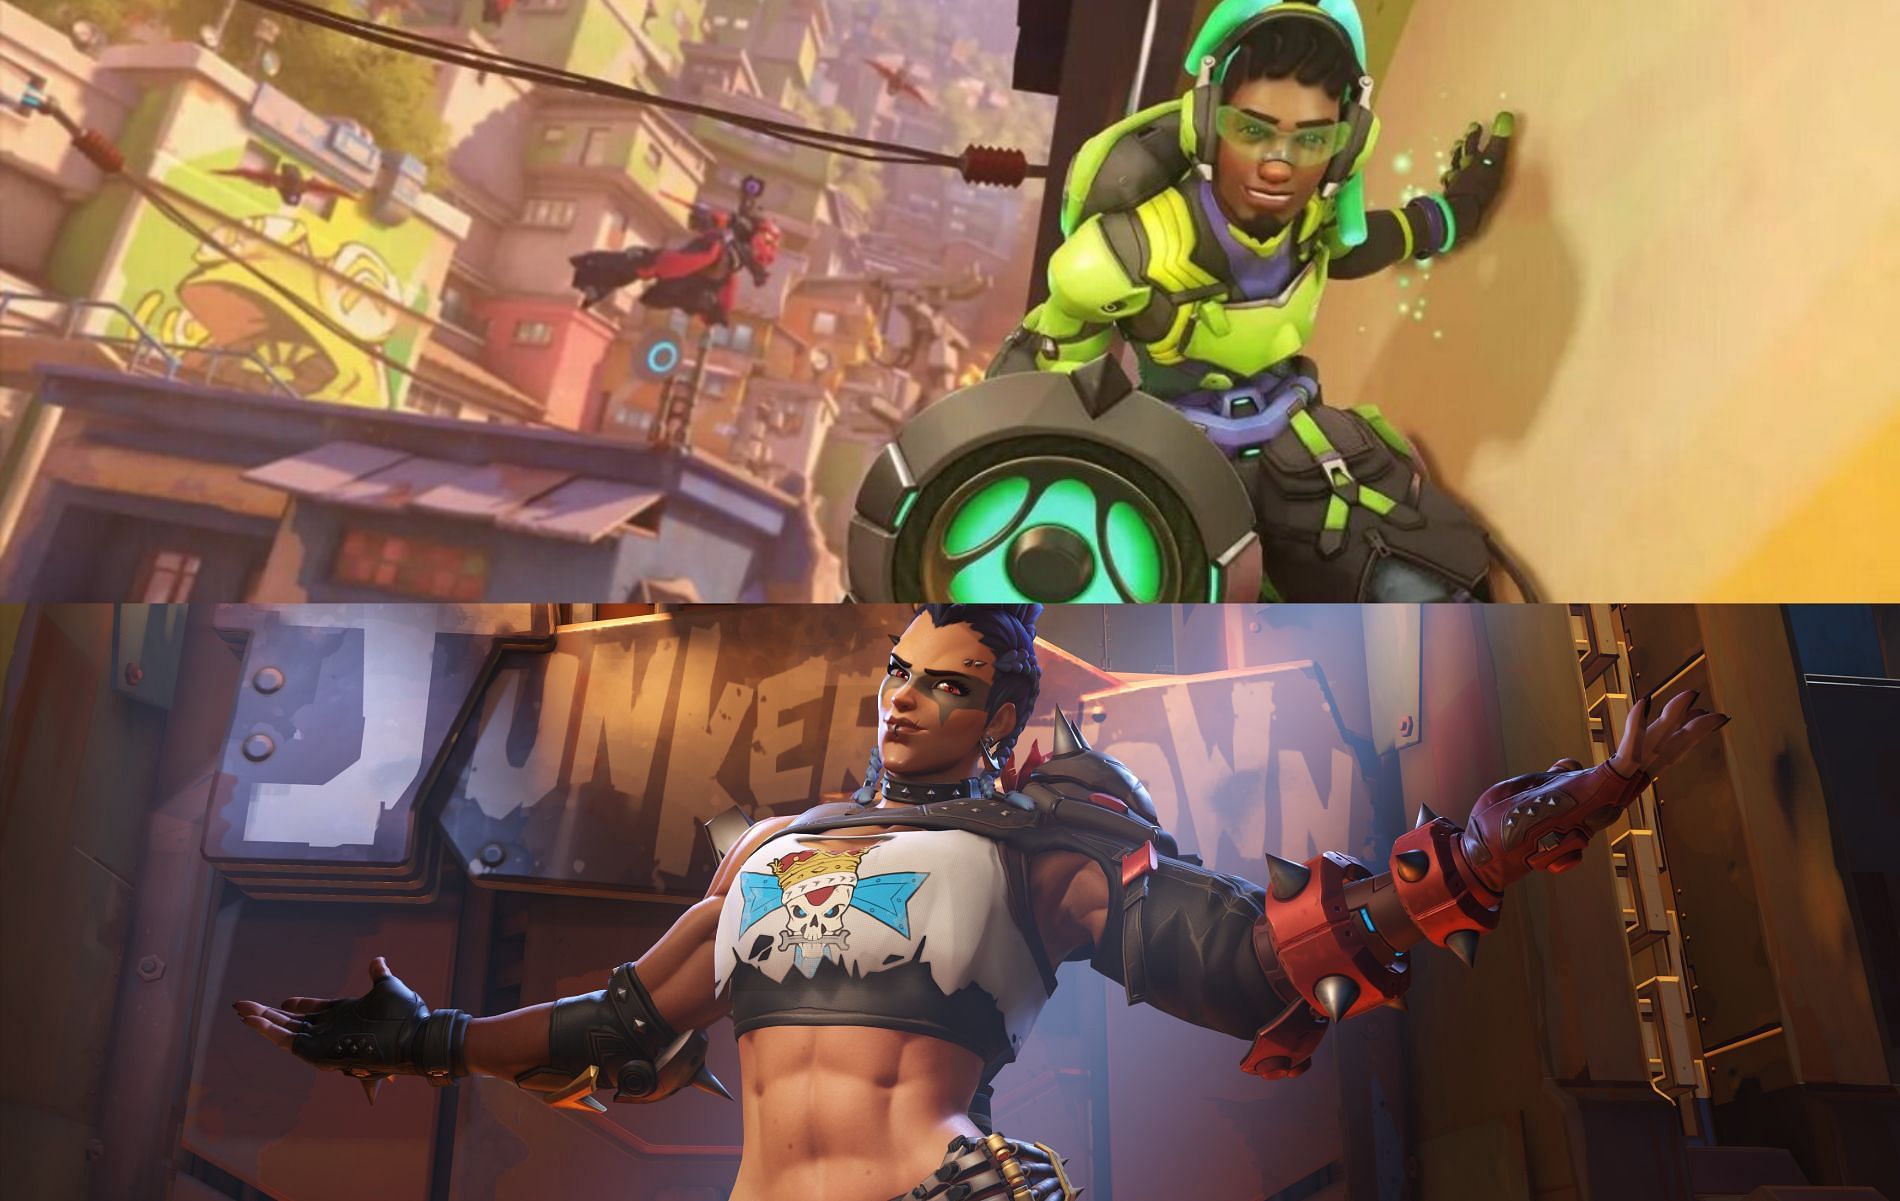 In Lucio( up) and Junker Queen(bottom) the Old meets the new (Images via Blizzard Entertainment)